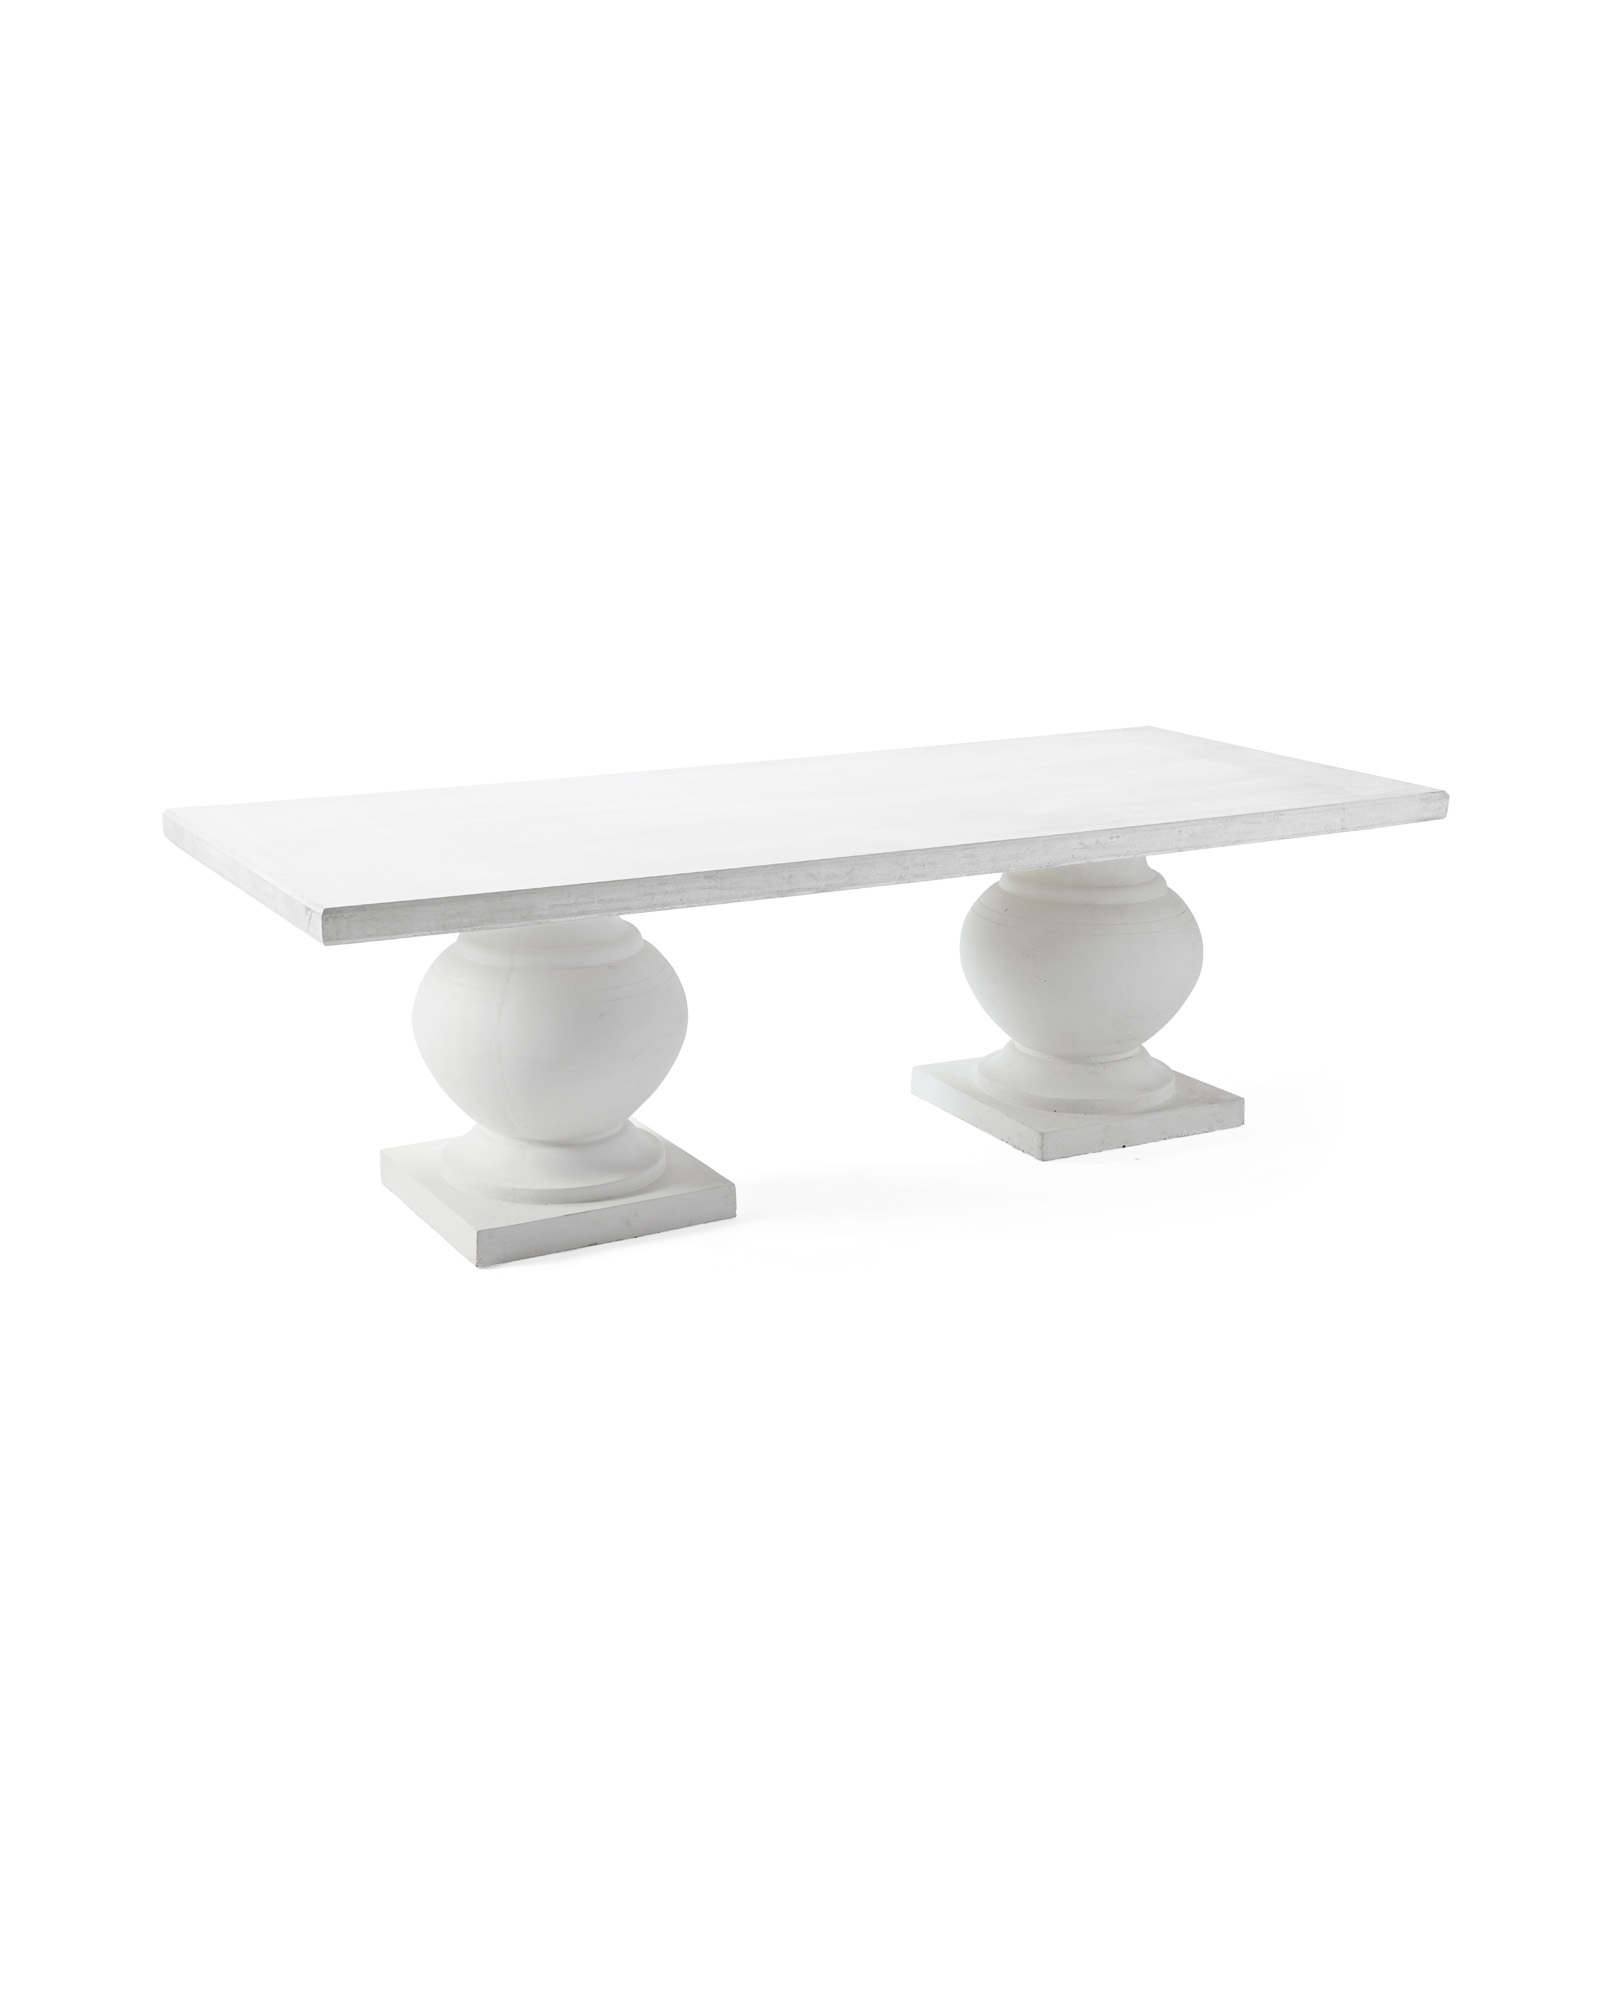 Terrace Dining Table - White/White - Image 2